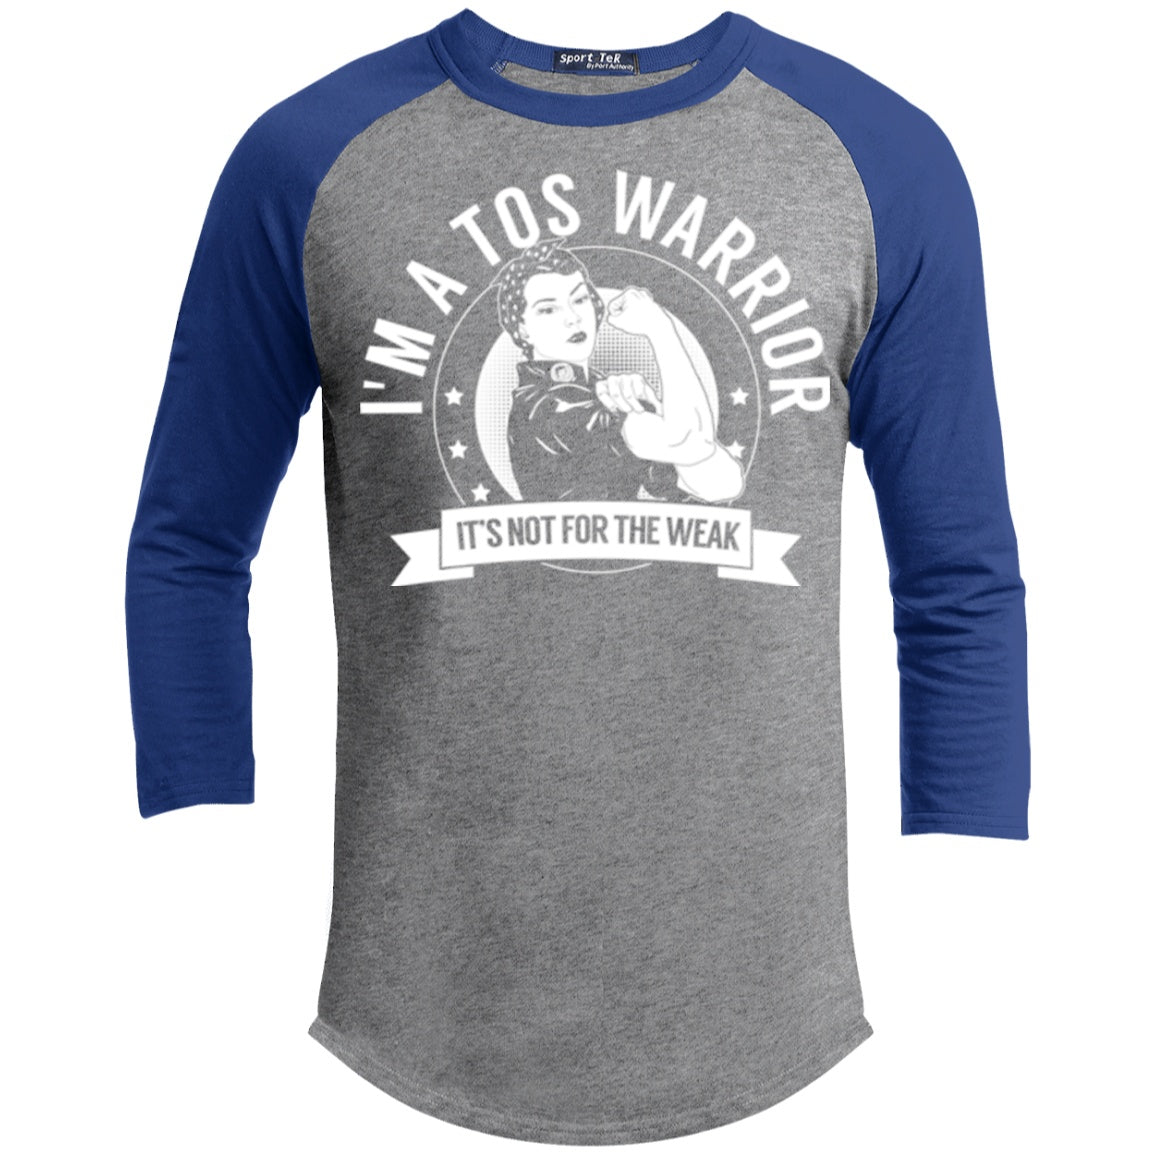 Thoracic Outlet Syndrome - TOS Warrior Not For The Weak Baseball Shirt - The Unchargeables